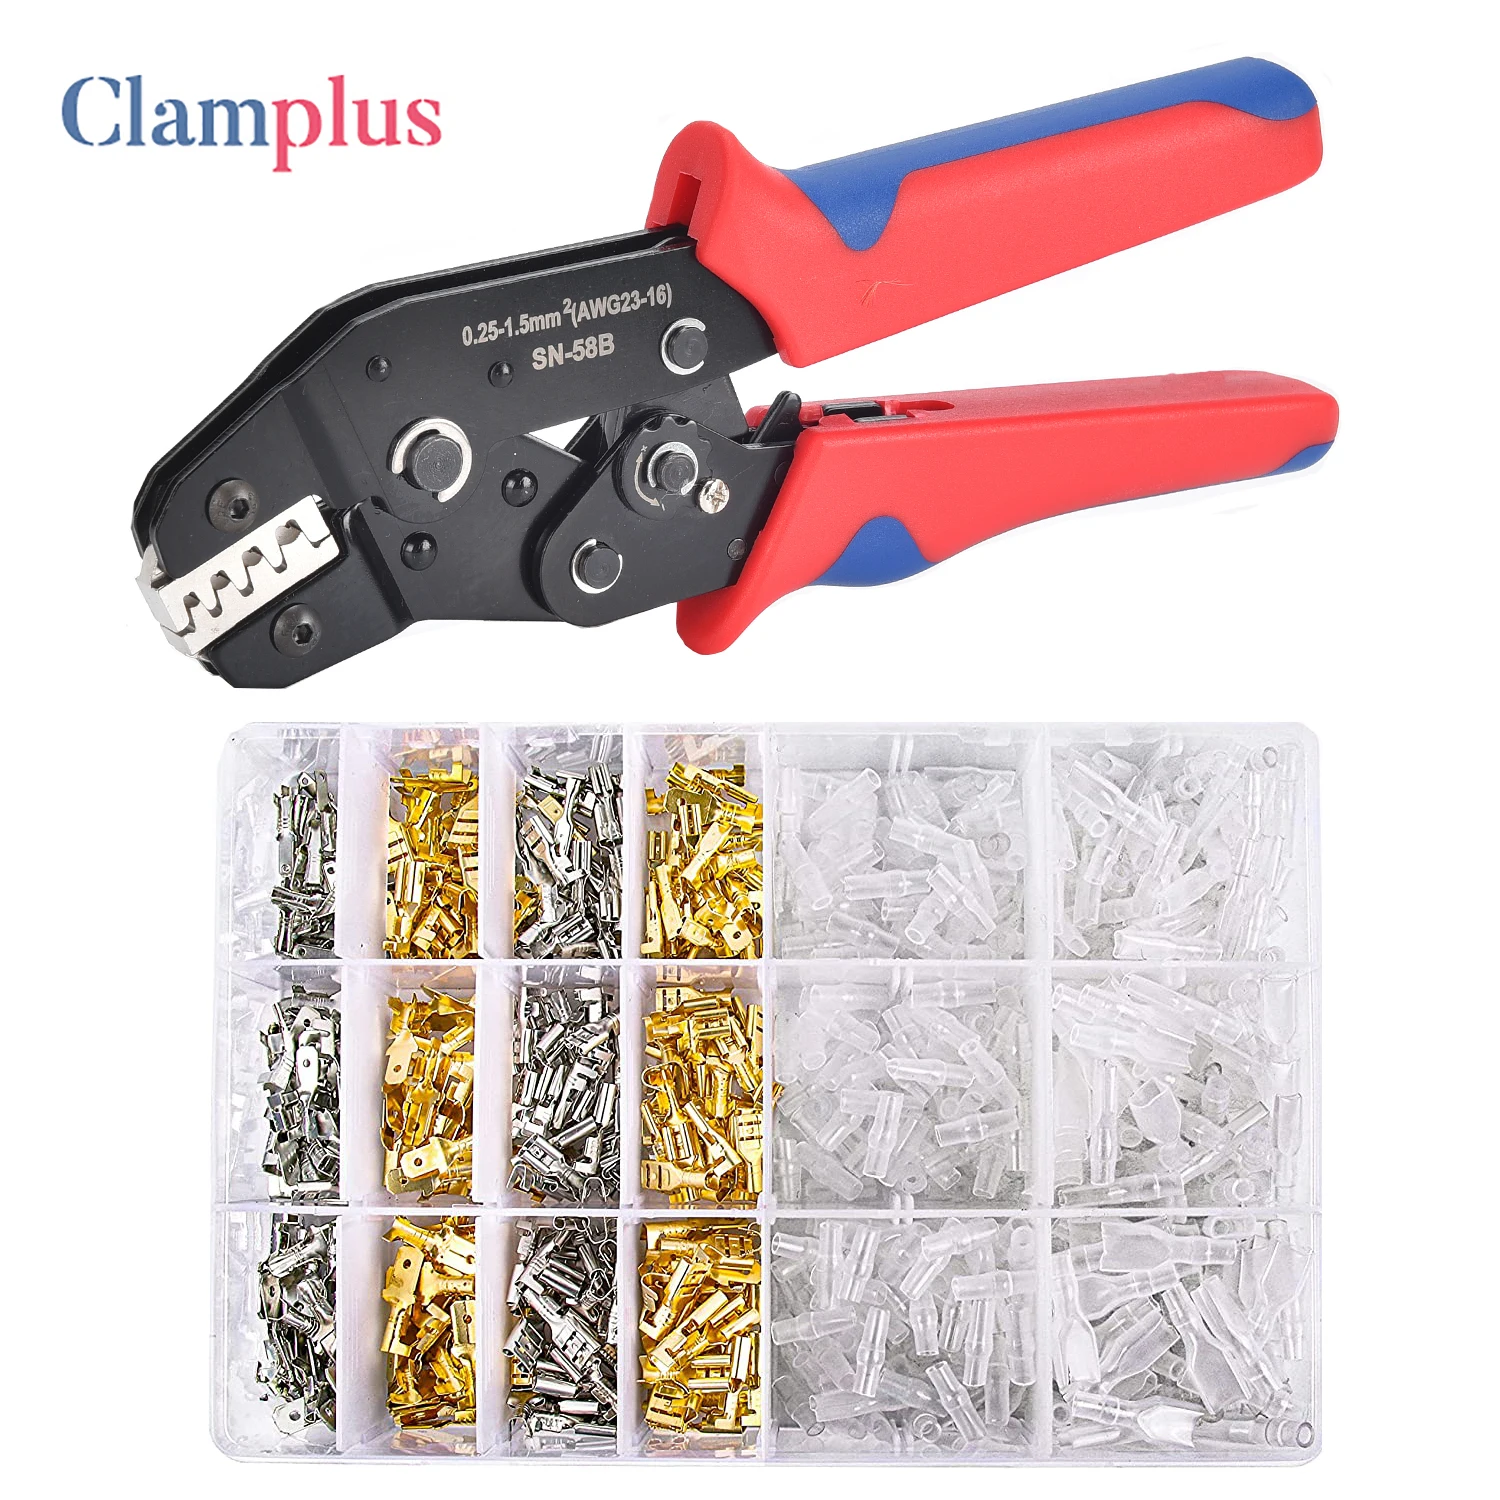 SN-58B Wire Terminal Crimping Tool Kit AWG24-16 Self-Adjusting Ratcheting Wire Crimper 720PCS Male and Female Spade Connectors